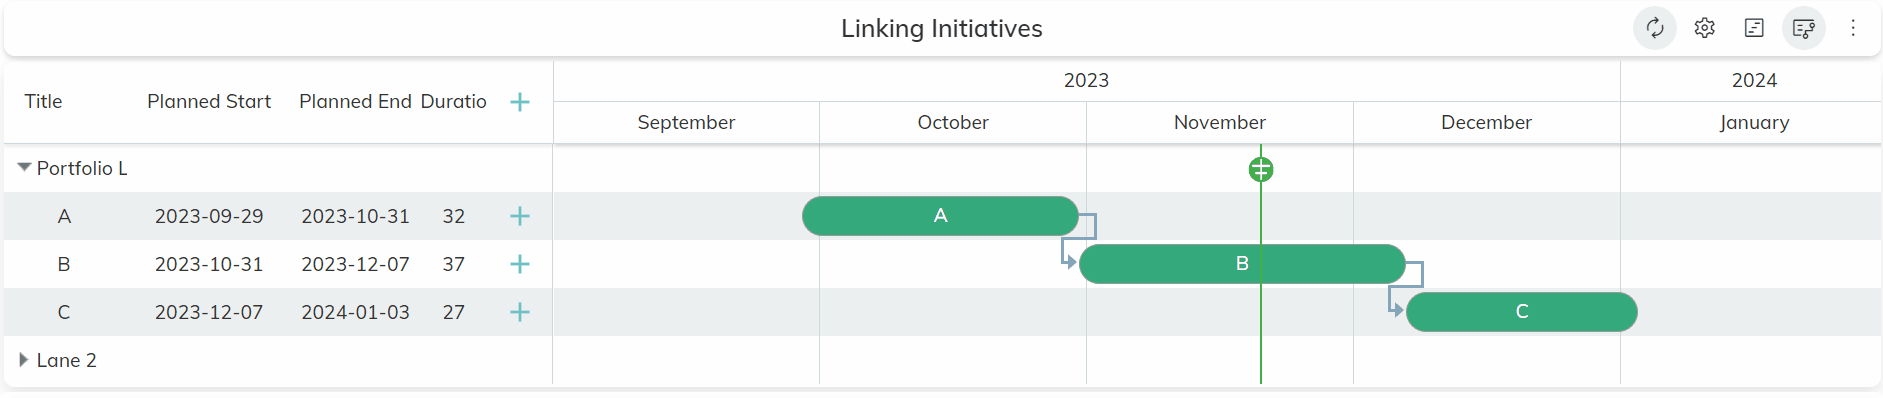 planning-view-linked-initiatives.gif